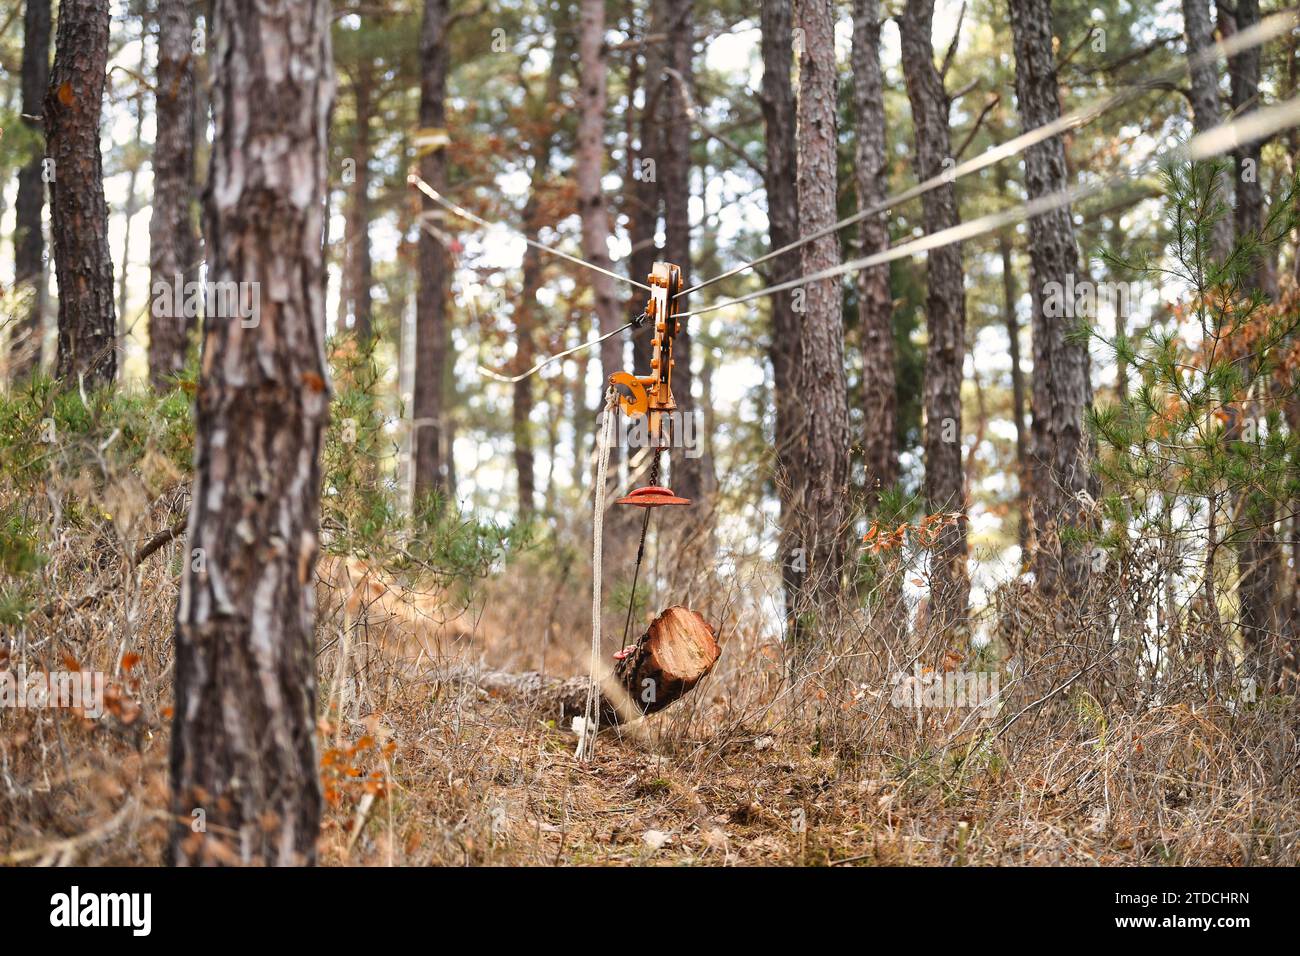 In the forest, workers are doing logging using equipment. Stock Photo